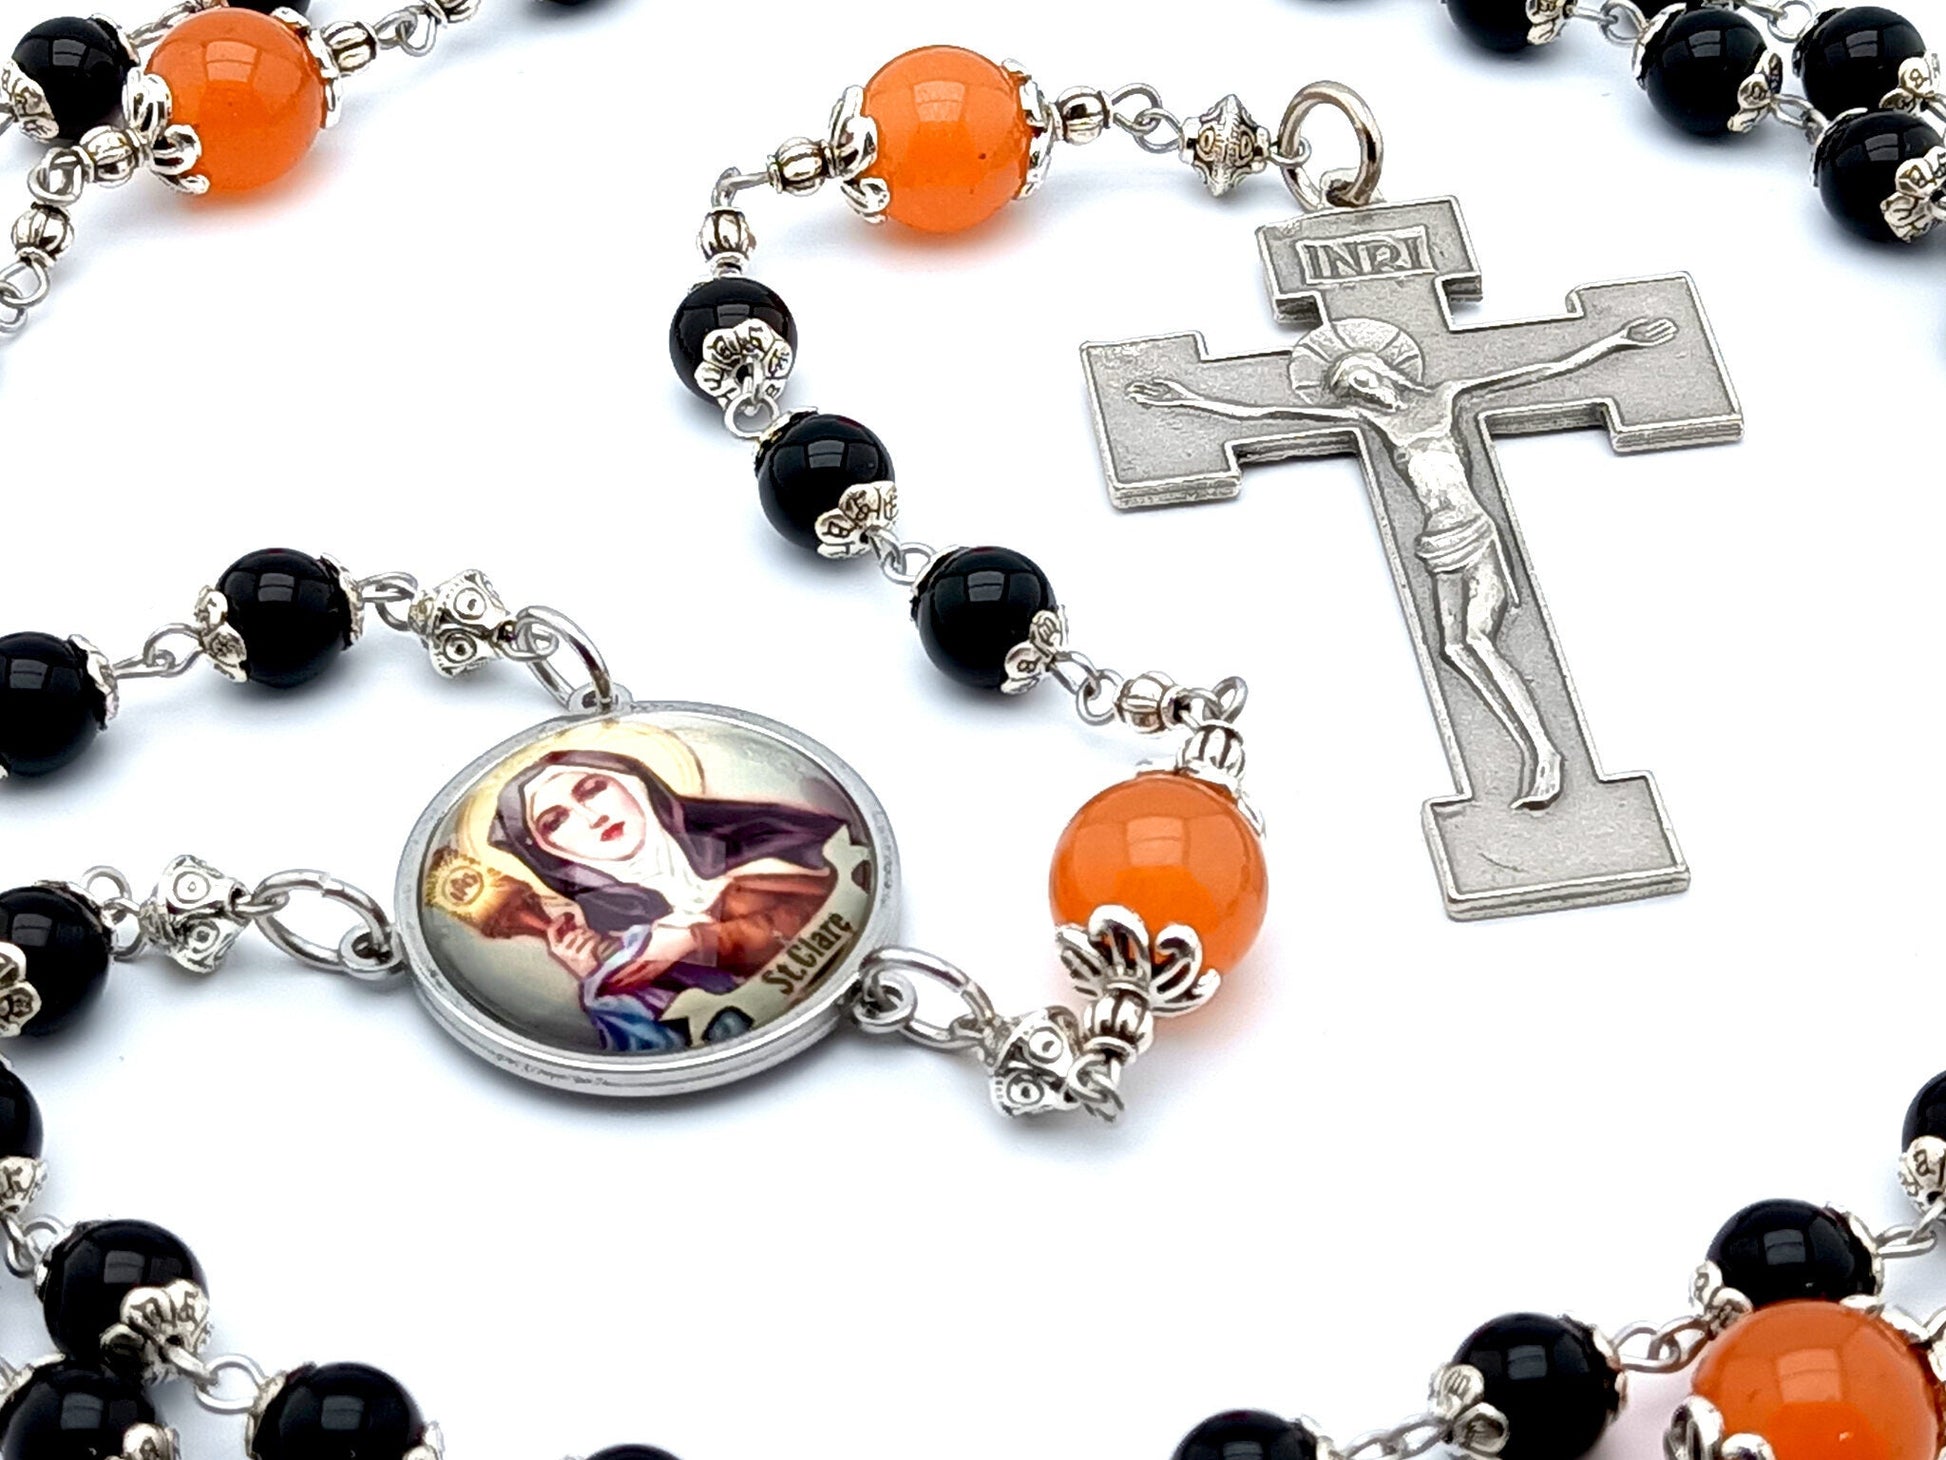 Saint Clare unique rosary beads with black onyx and tangerine gemstone beads, silver crucifix and picture centre medal.